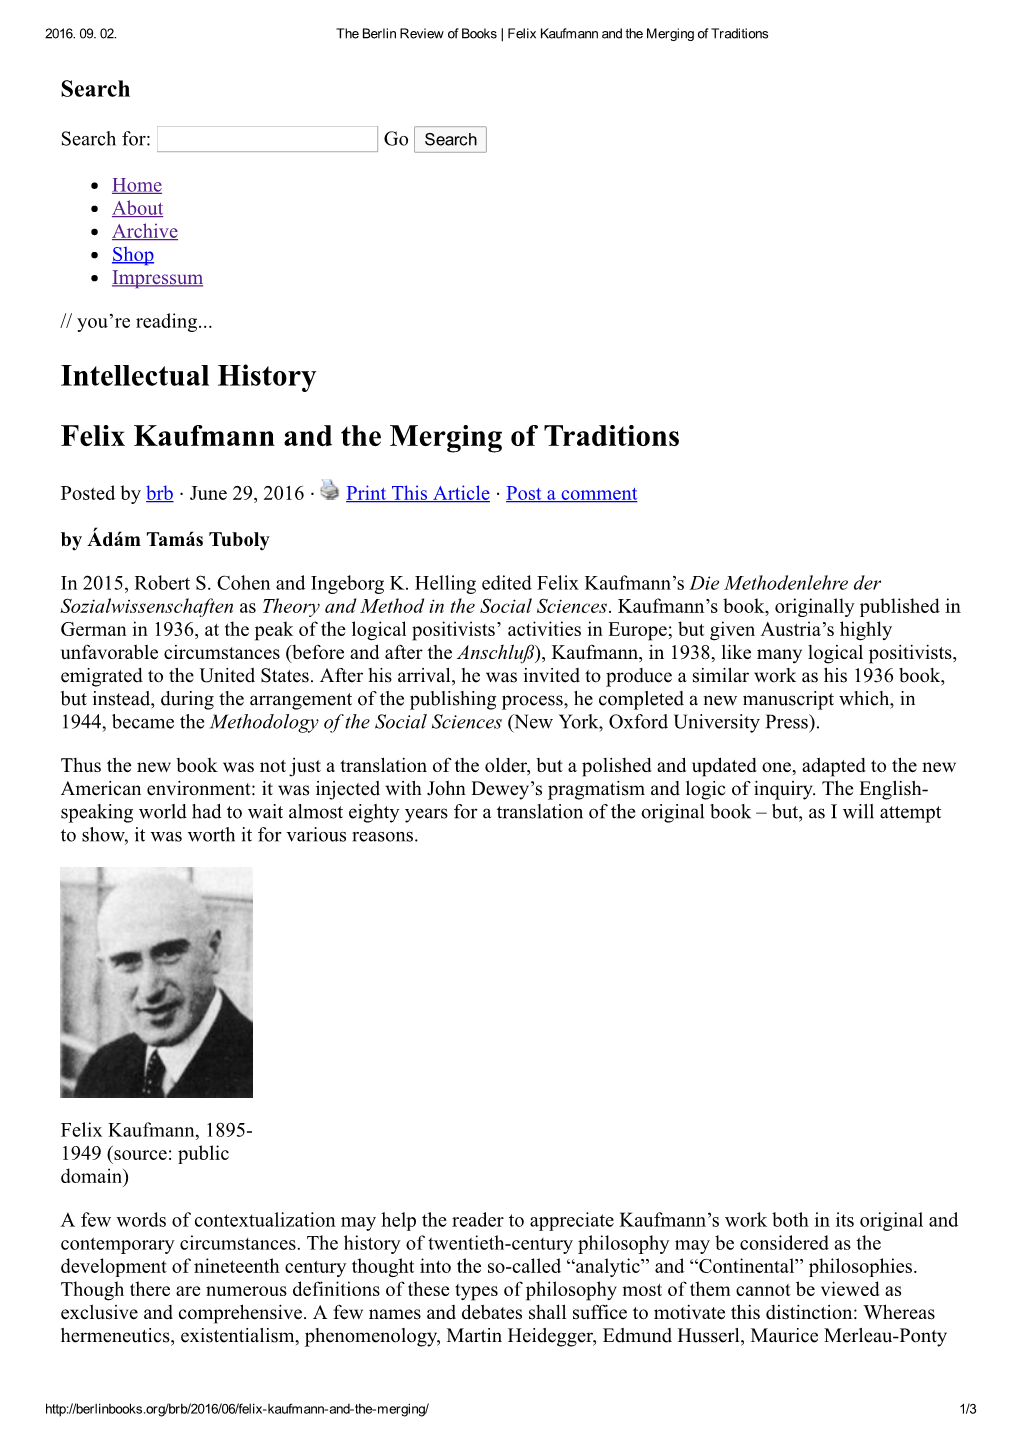 Intellectual History Felix Kaufmann and the Merging of Traditions